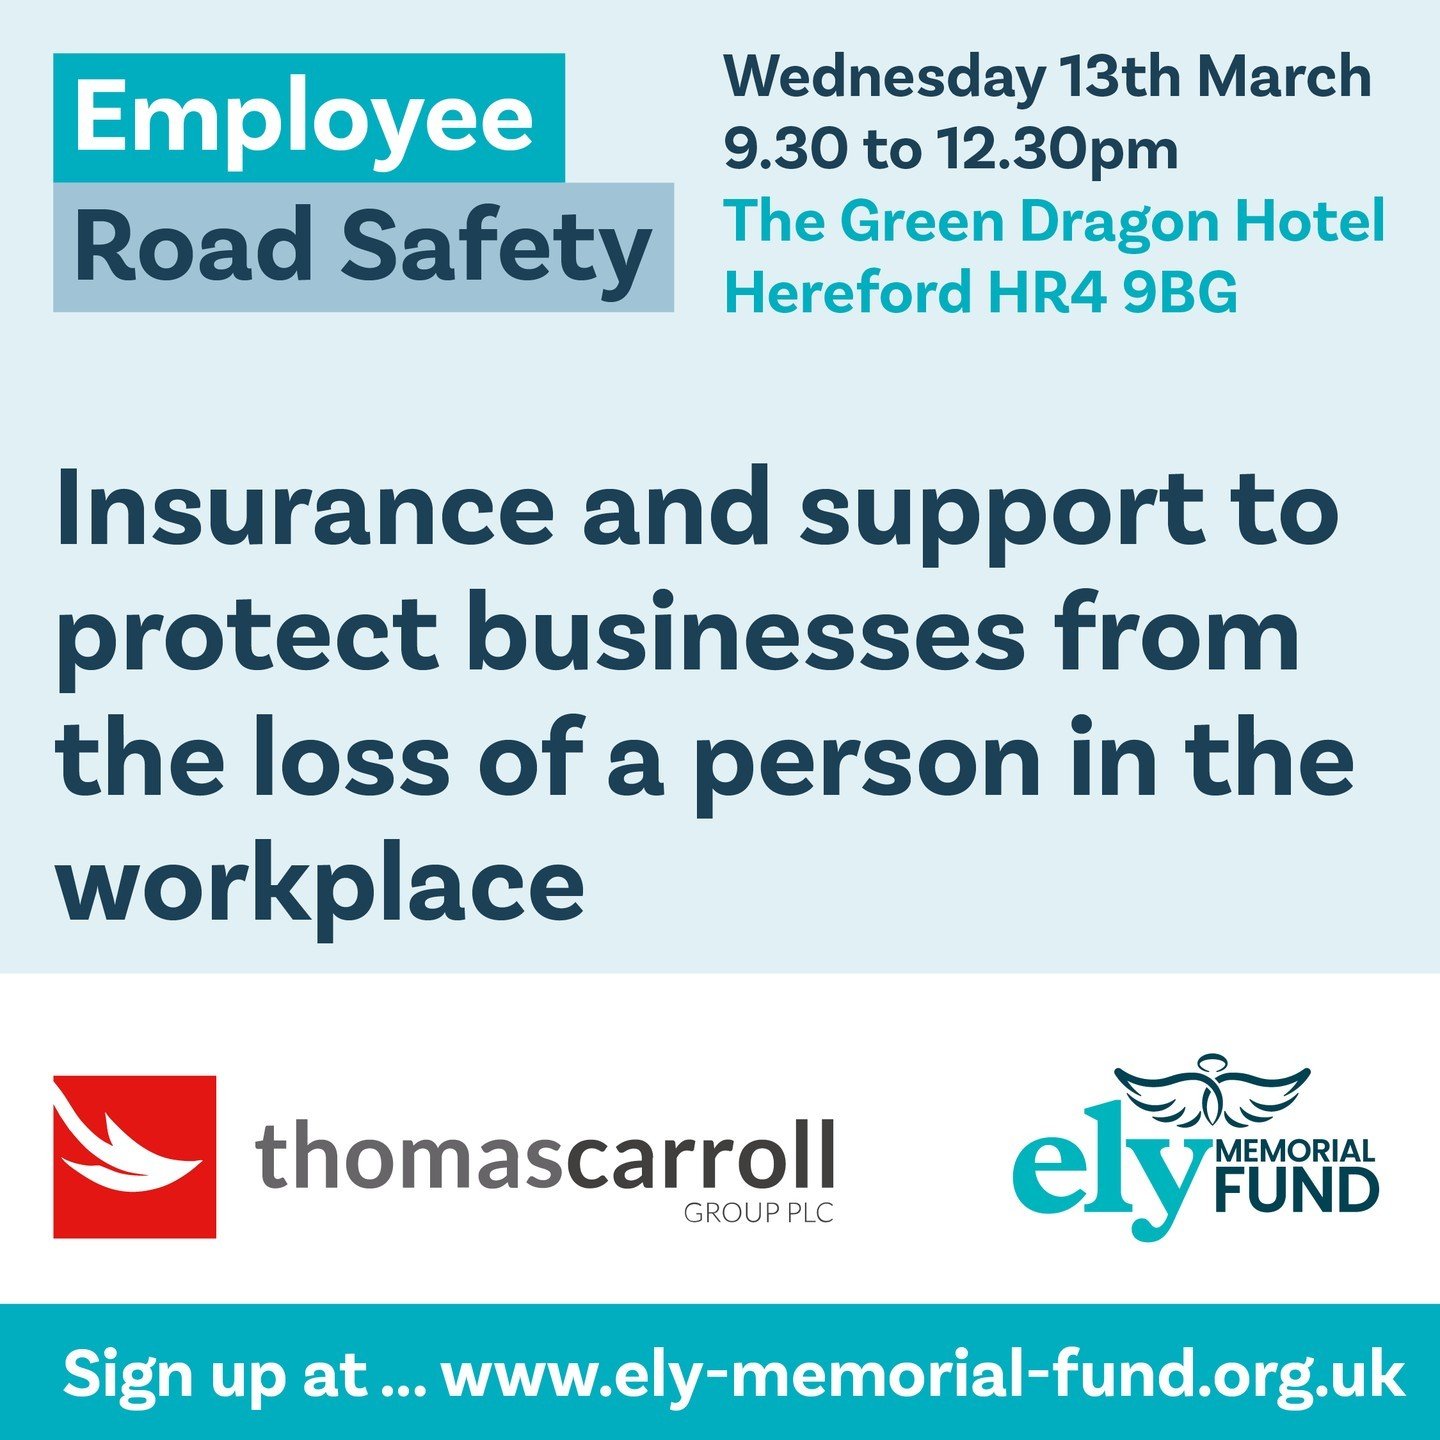 Just one more day to go until our *FREE to attend* Employee Road Safety Event on 13th March at The Green Dragon Hotel, Hereford.

Looking to expand your knowledge?
Book by 6pm today to secure your space!
https://ow.ly/YzTM50QQFFA

#drivingsafely #Res